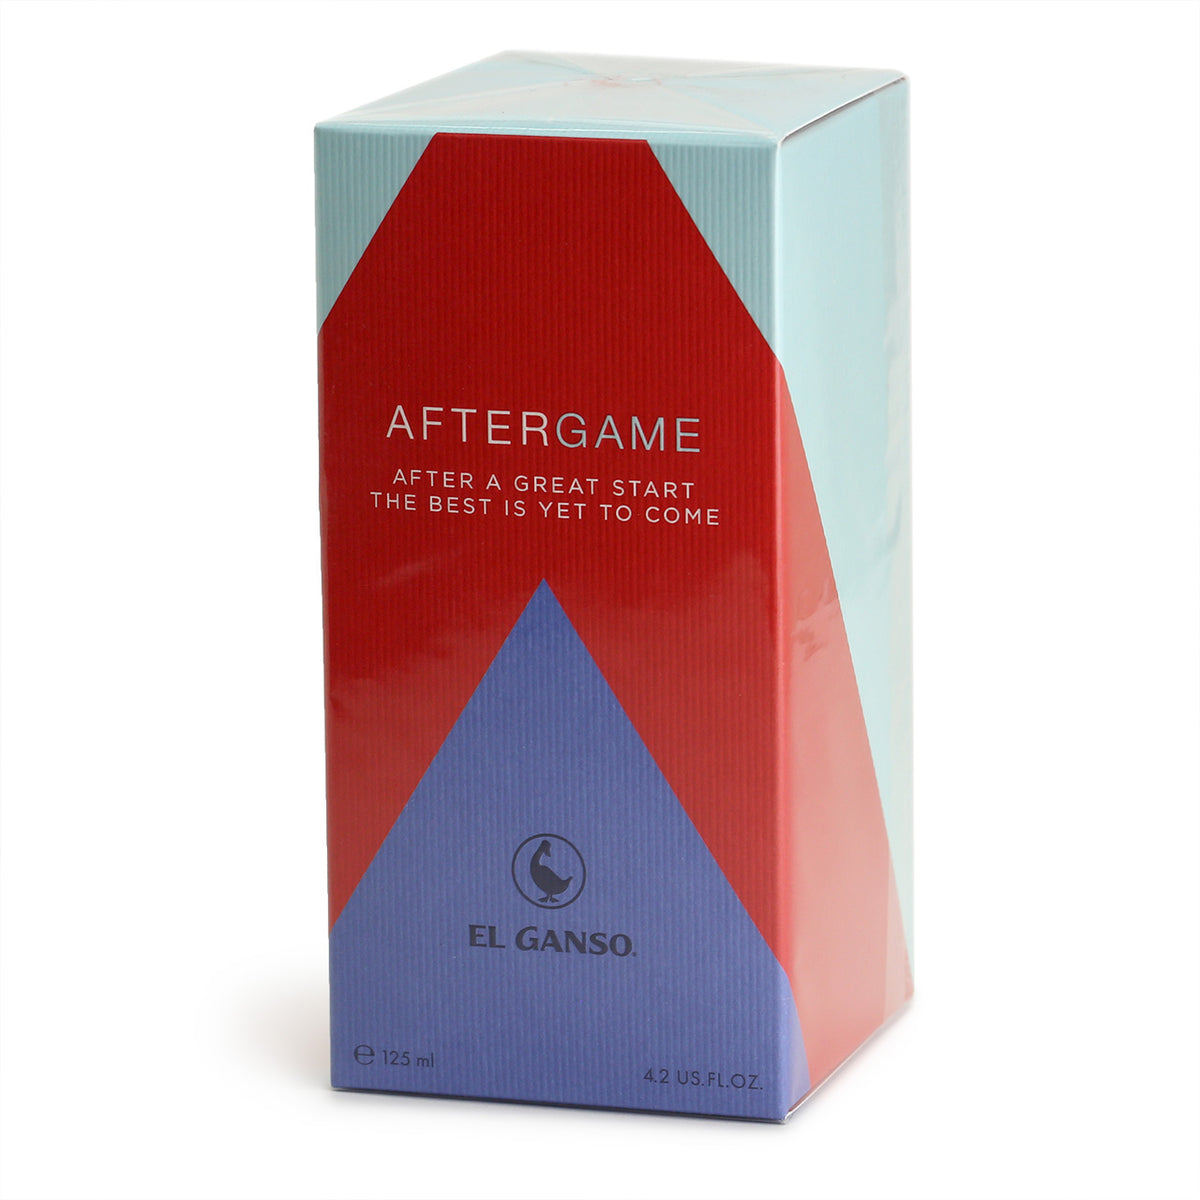 Aftergame packaging is a read and two-tome blue box with light blue and white taxt and an upward-arrow graphic